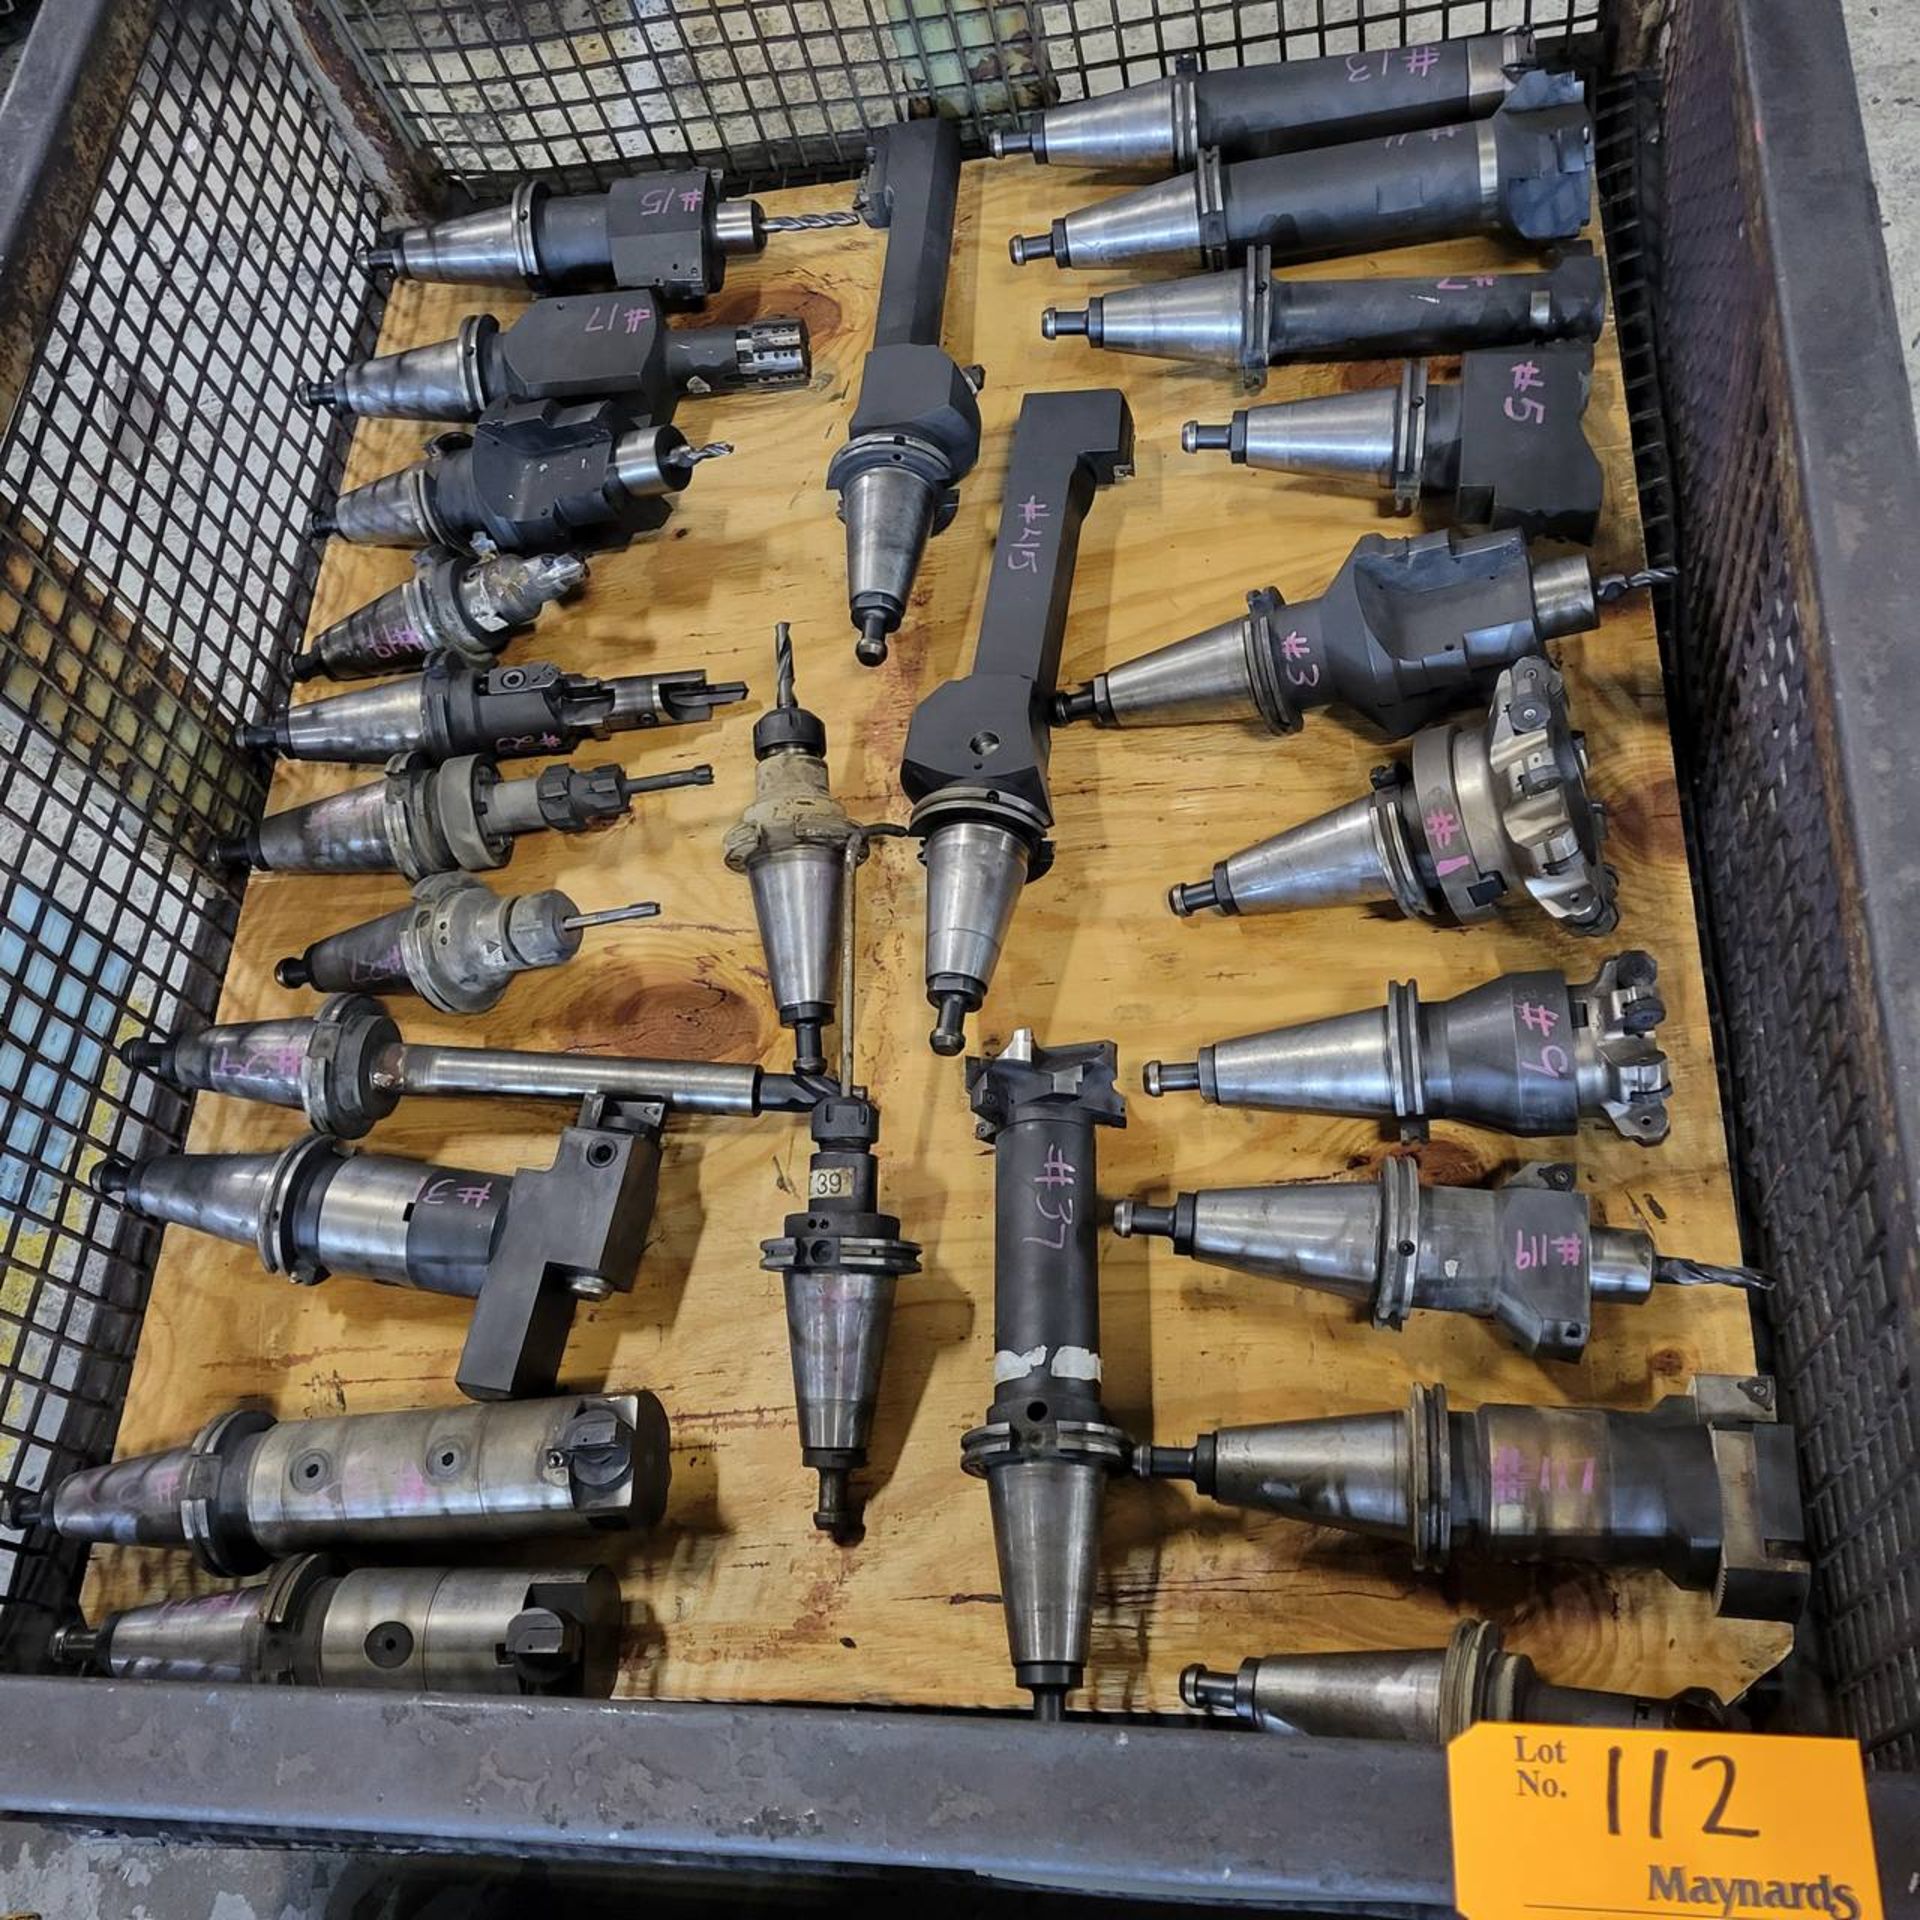 Approx. (26) Cat 50 taper assorted tool holders